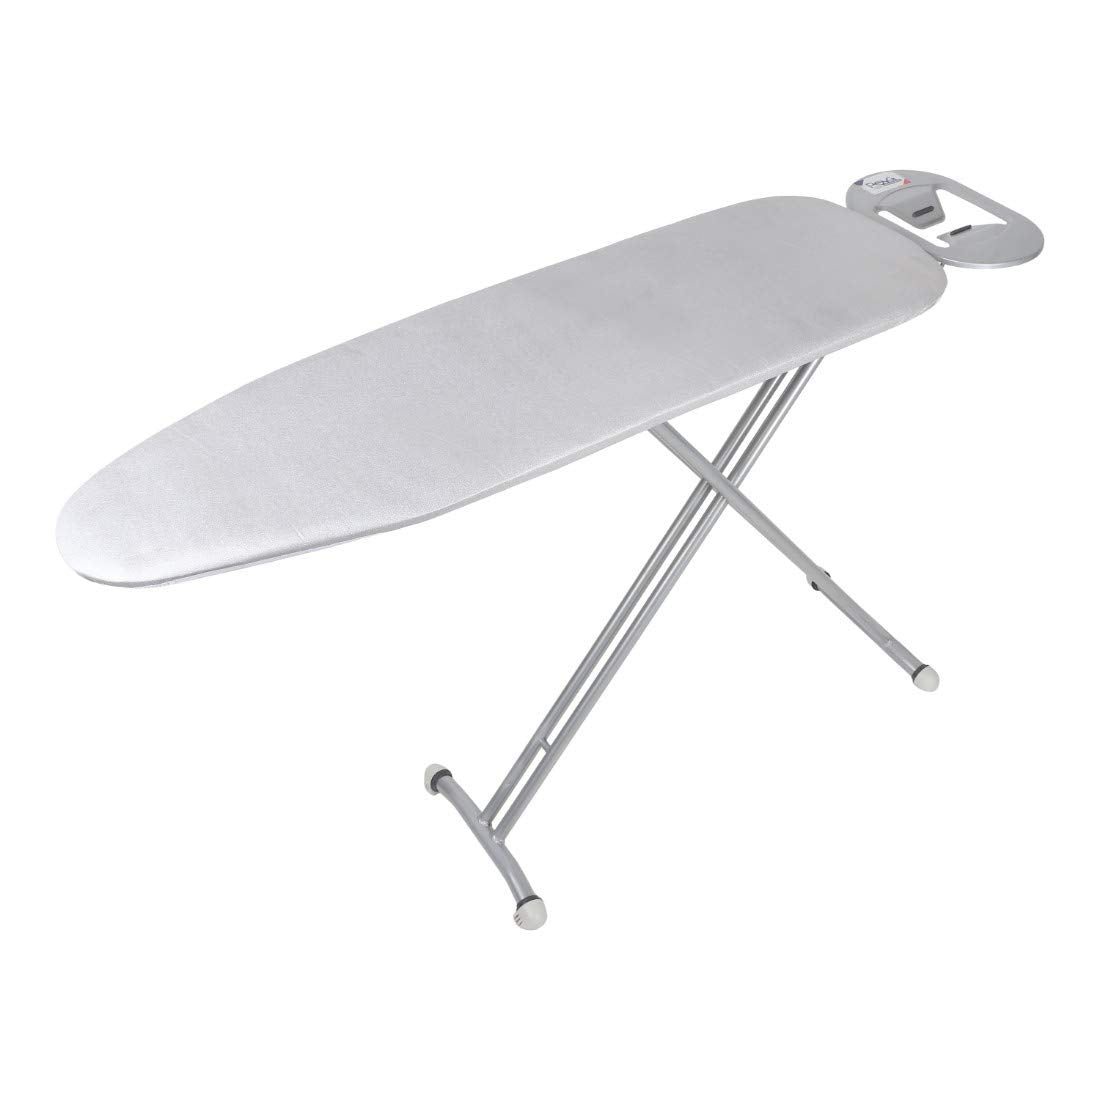 SilverLuxe Ironing Board |  H-Legs Foldable Ironing Boards with Padded Fireproof Fabric I Grey)